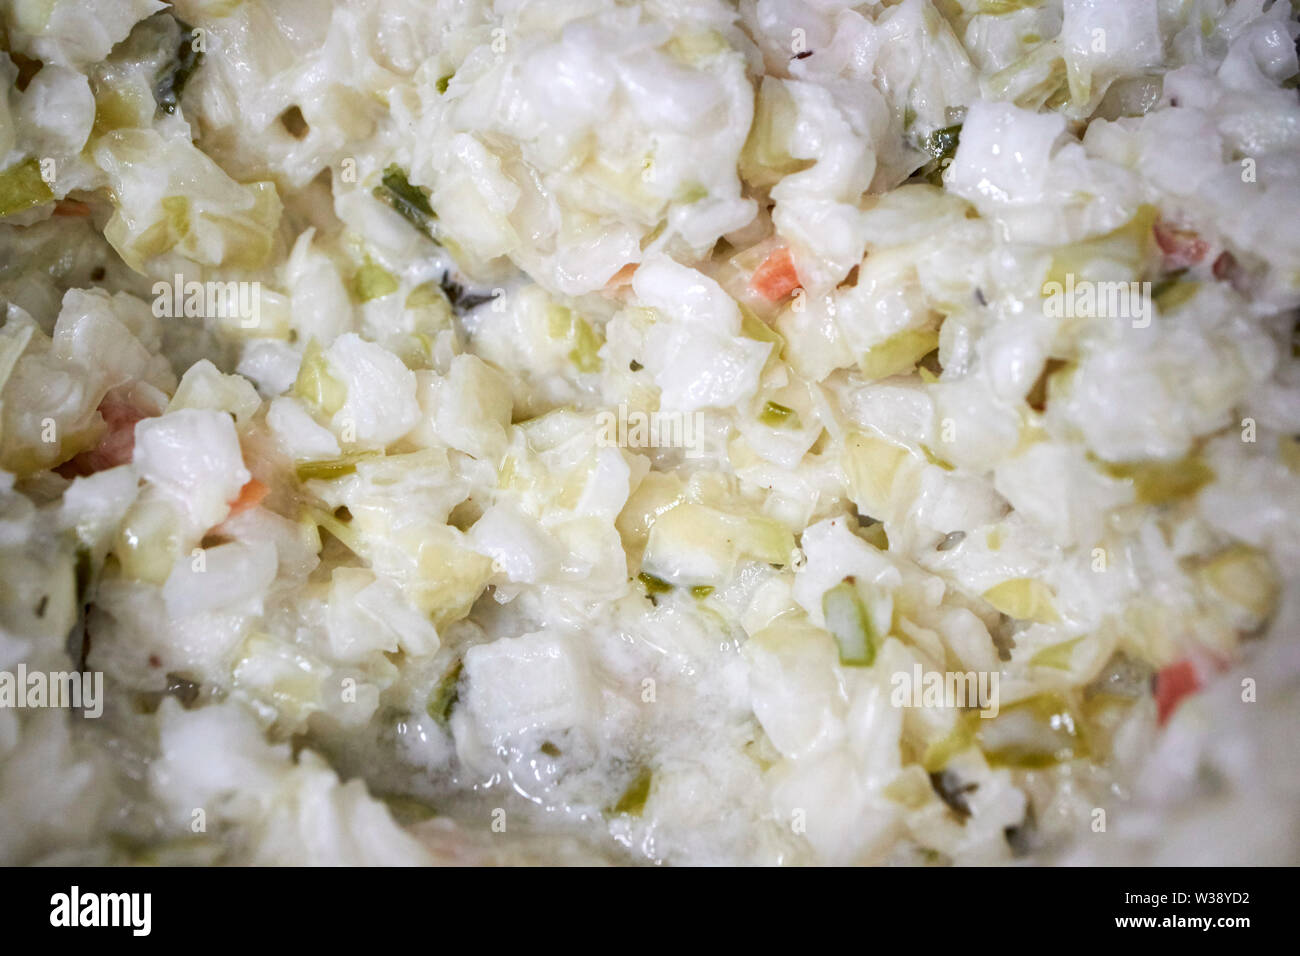 finely chopped coleslaw produced in the USA United States of America Stock Photo